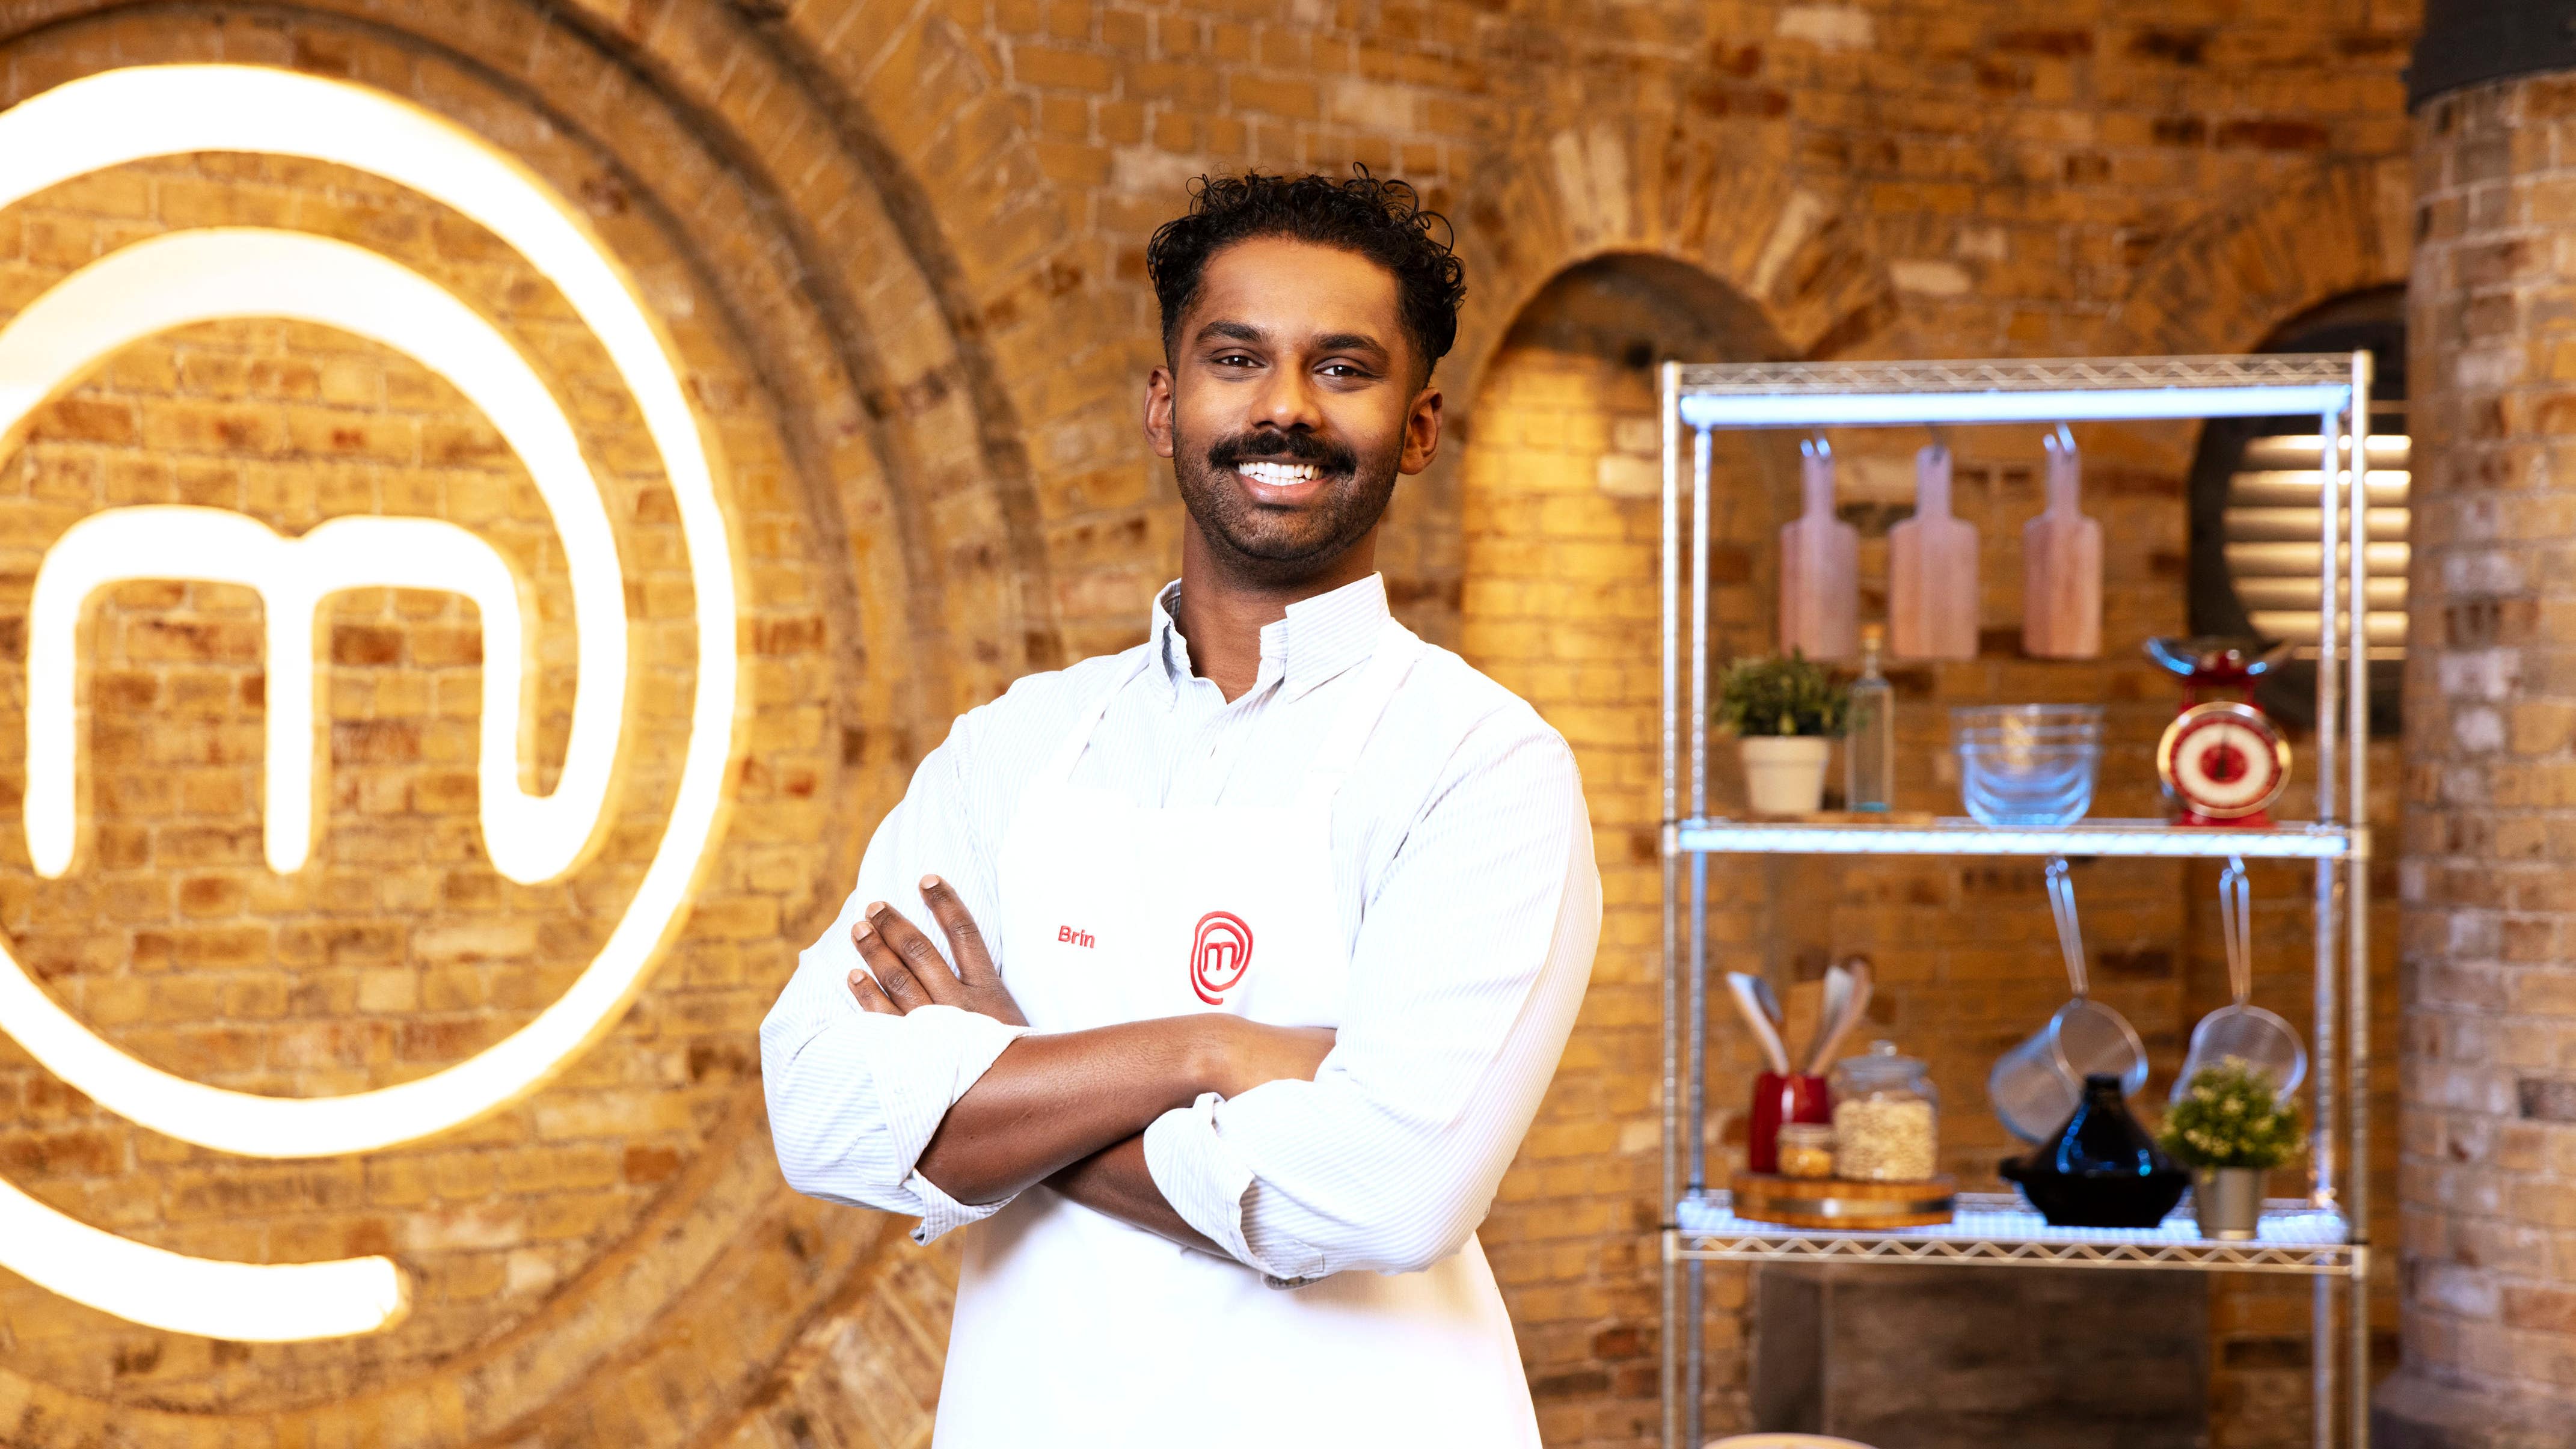 ‘Dangerously clever’ vet wins MasterChef with octopus and venison dishes